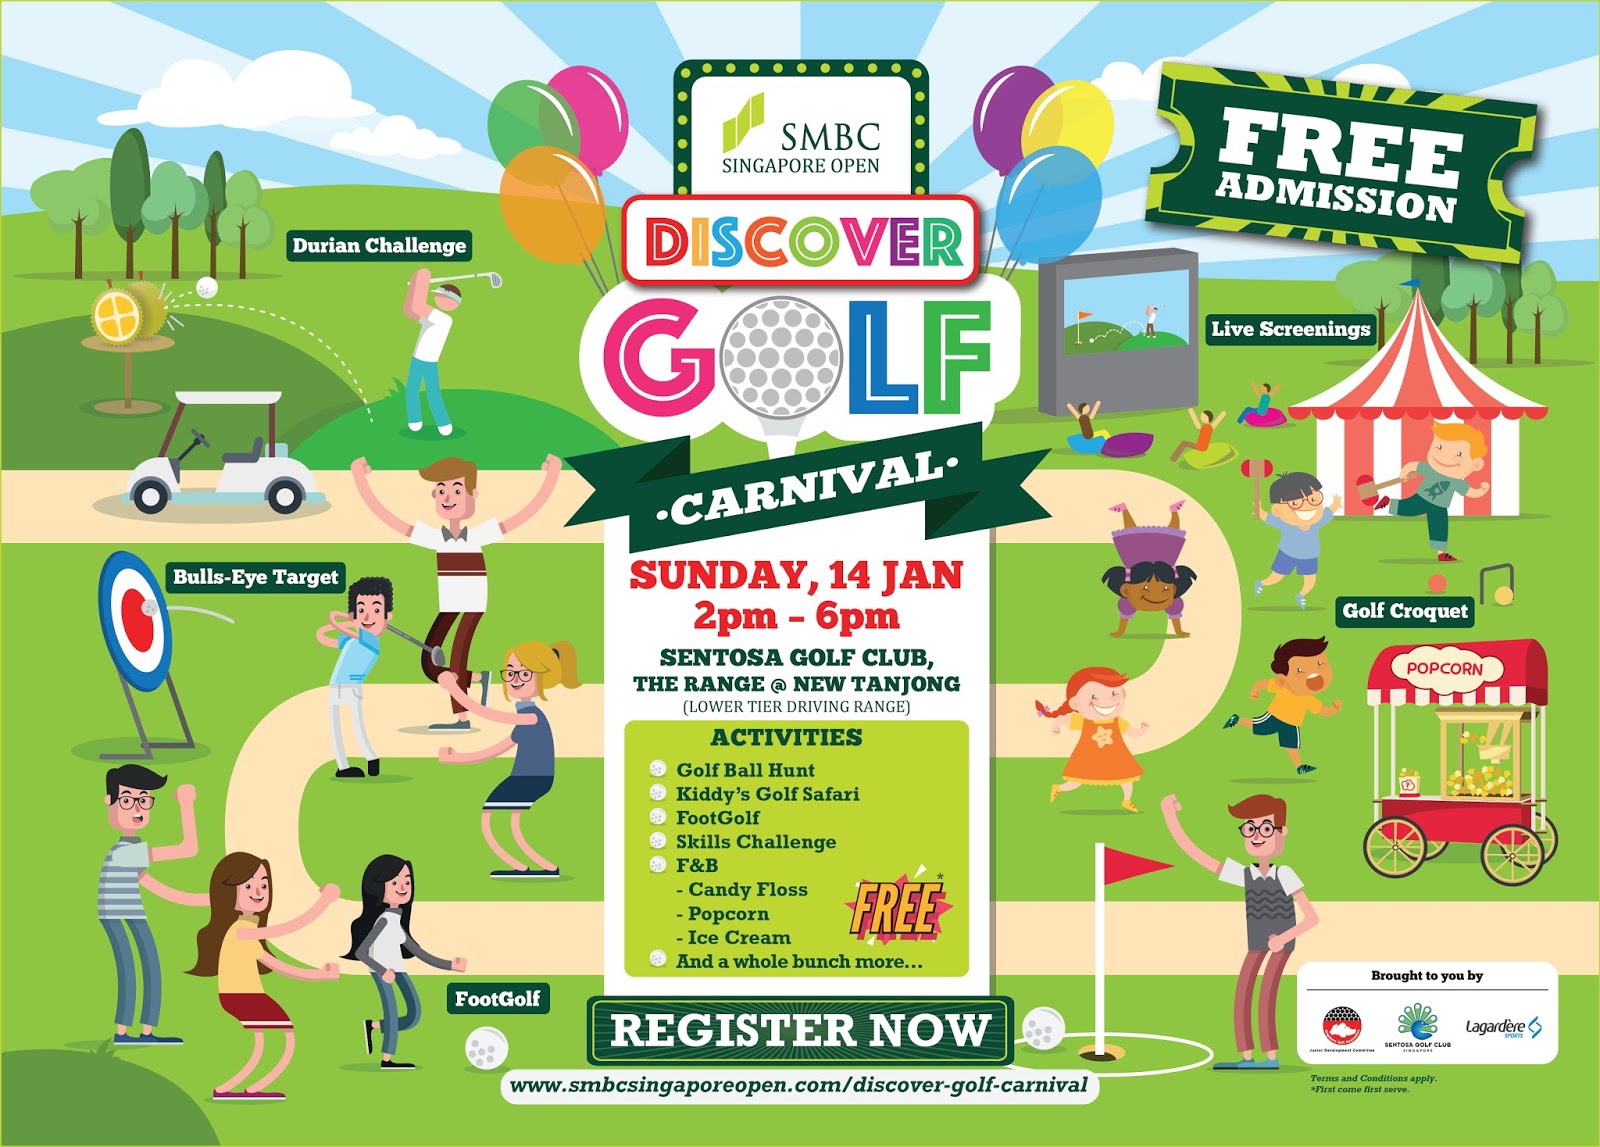 http://www.sga.org.sg/join-us-at-discover-golf-carnival-admission-is-free/